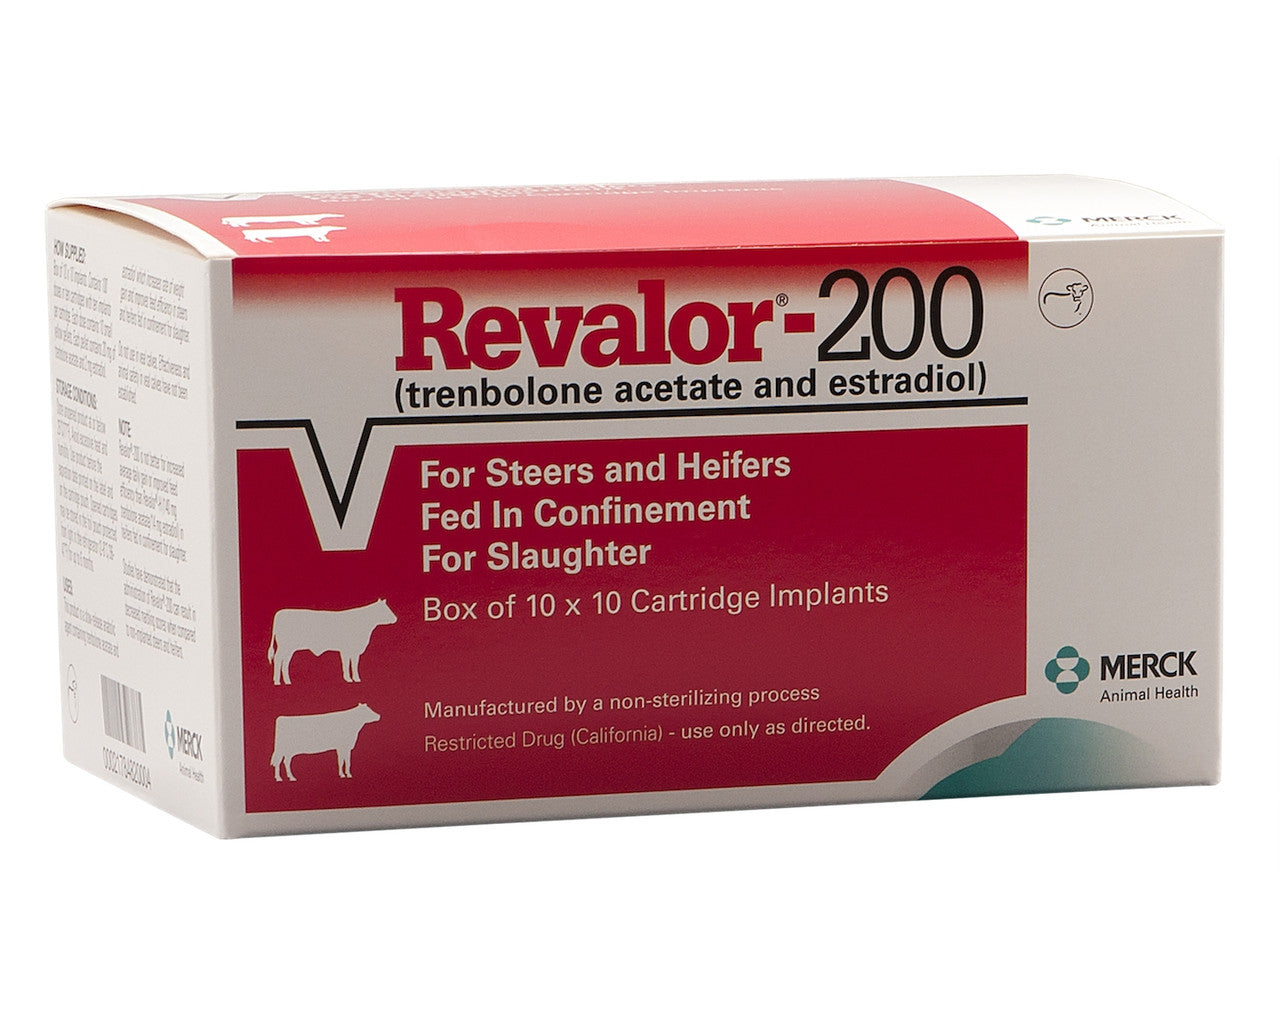 Revalor-200 Implant for Steers and Heifers (10 dose clip)